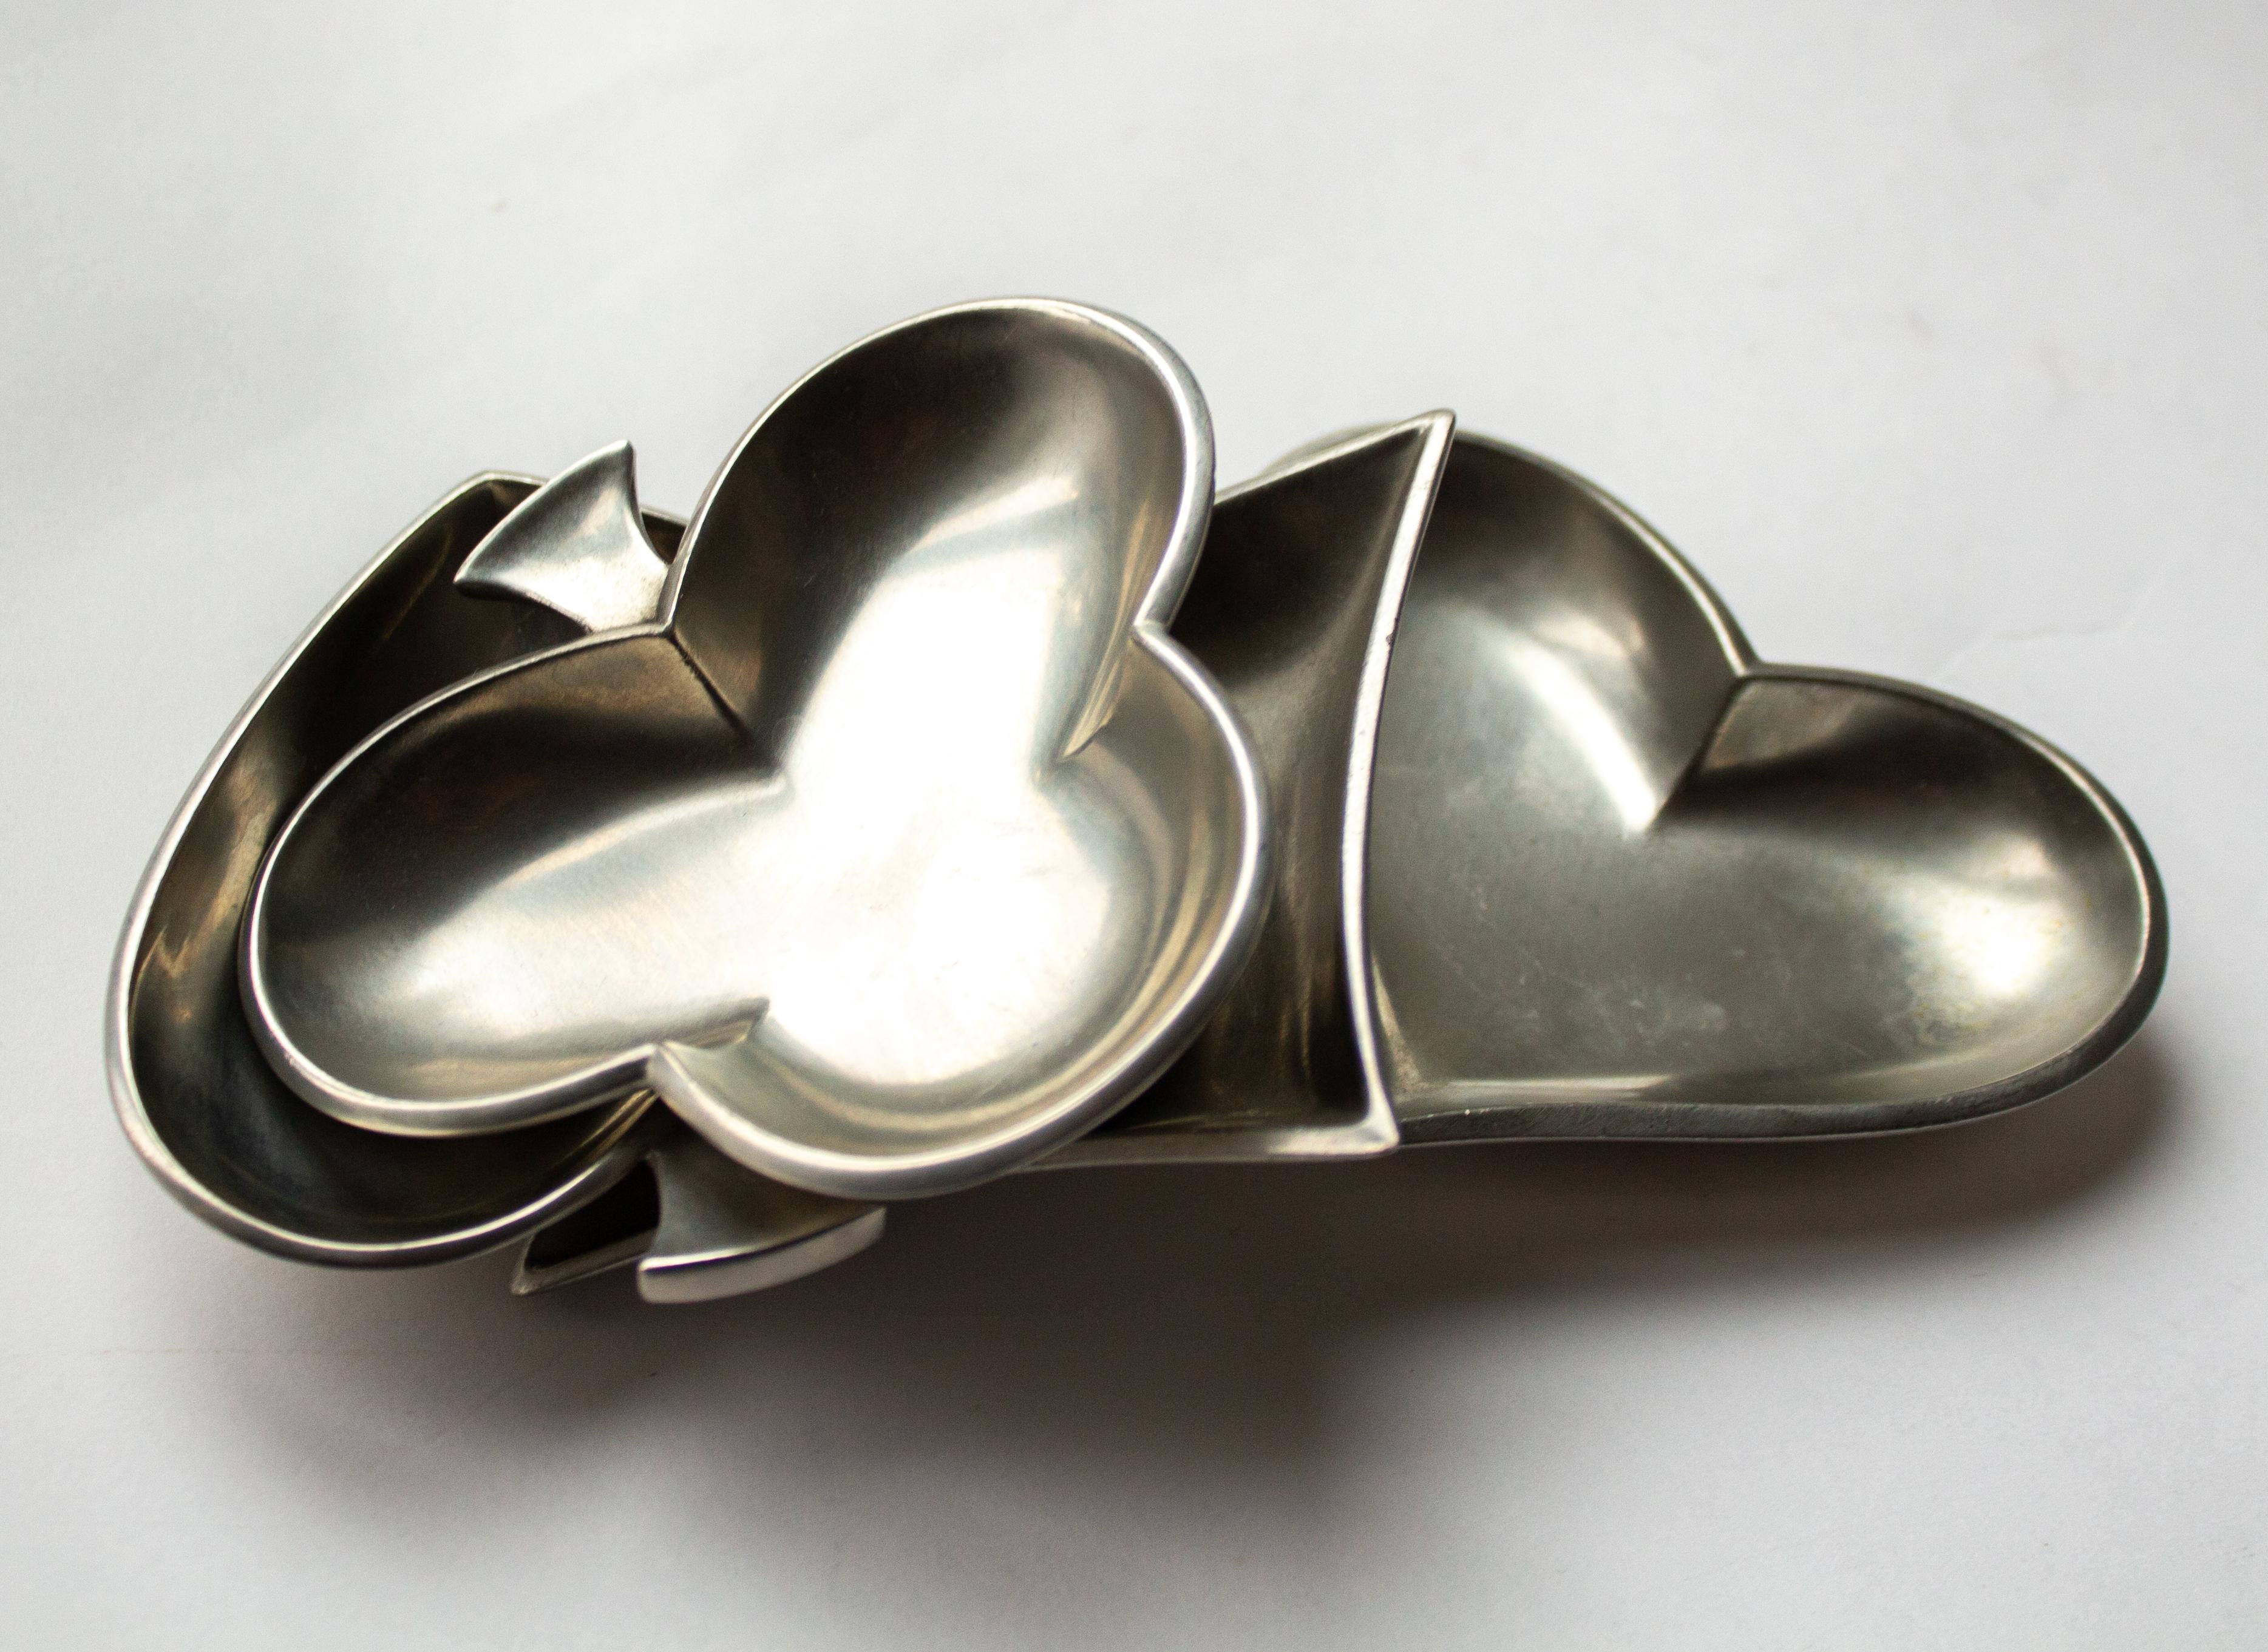 Set of 4 Mid-Century pewter dishes in shape of playing card by Just Andersen, Denmark. Stamped Just, Denmark, 2630, 2631, 2632, 2633 

Just Andersen was born July 13, 1884 in Godhavn, Greenland. He studied at the Royal Academy of Art in Copenhagen